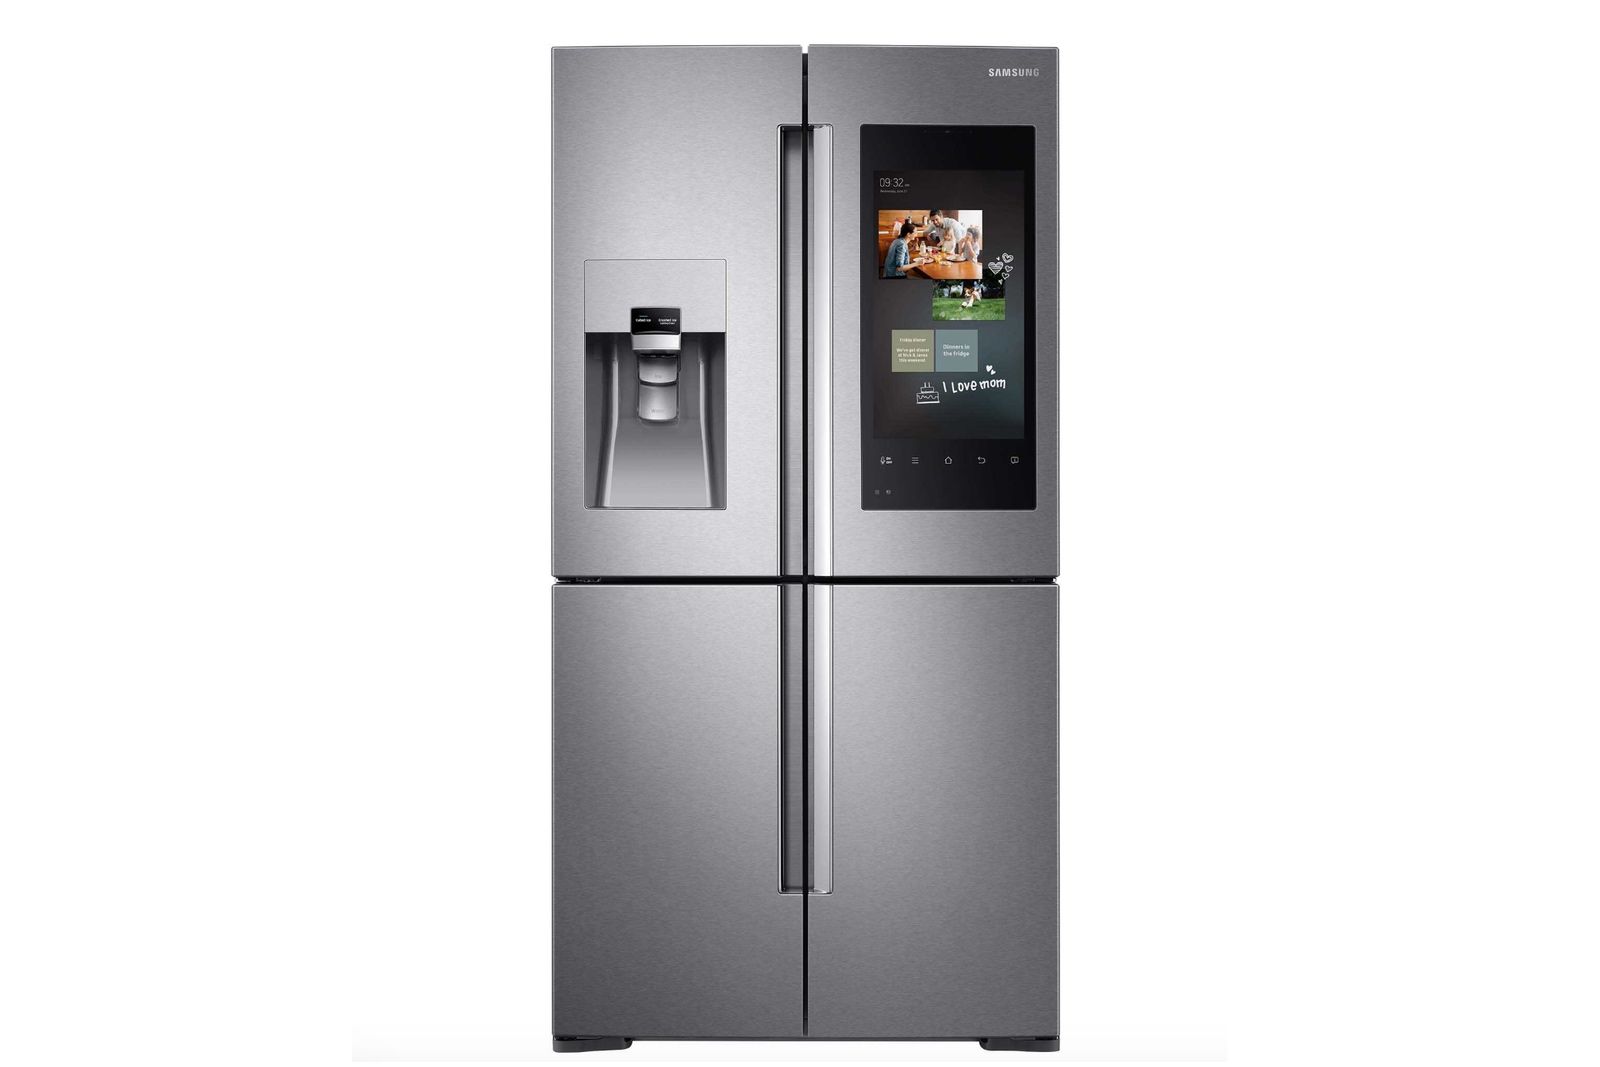 Best smart fridges 2020 Keep your food cool with added smarts image 1